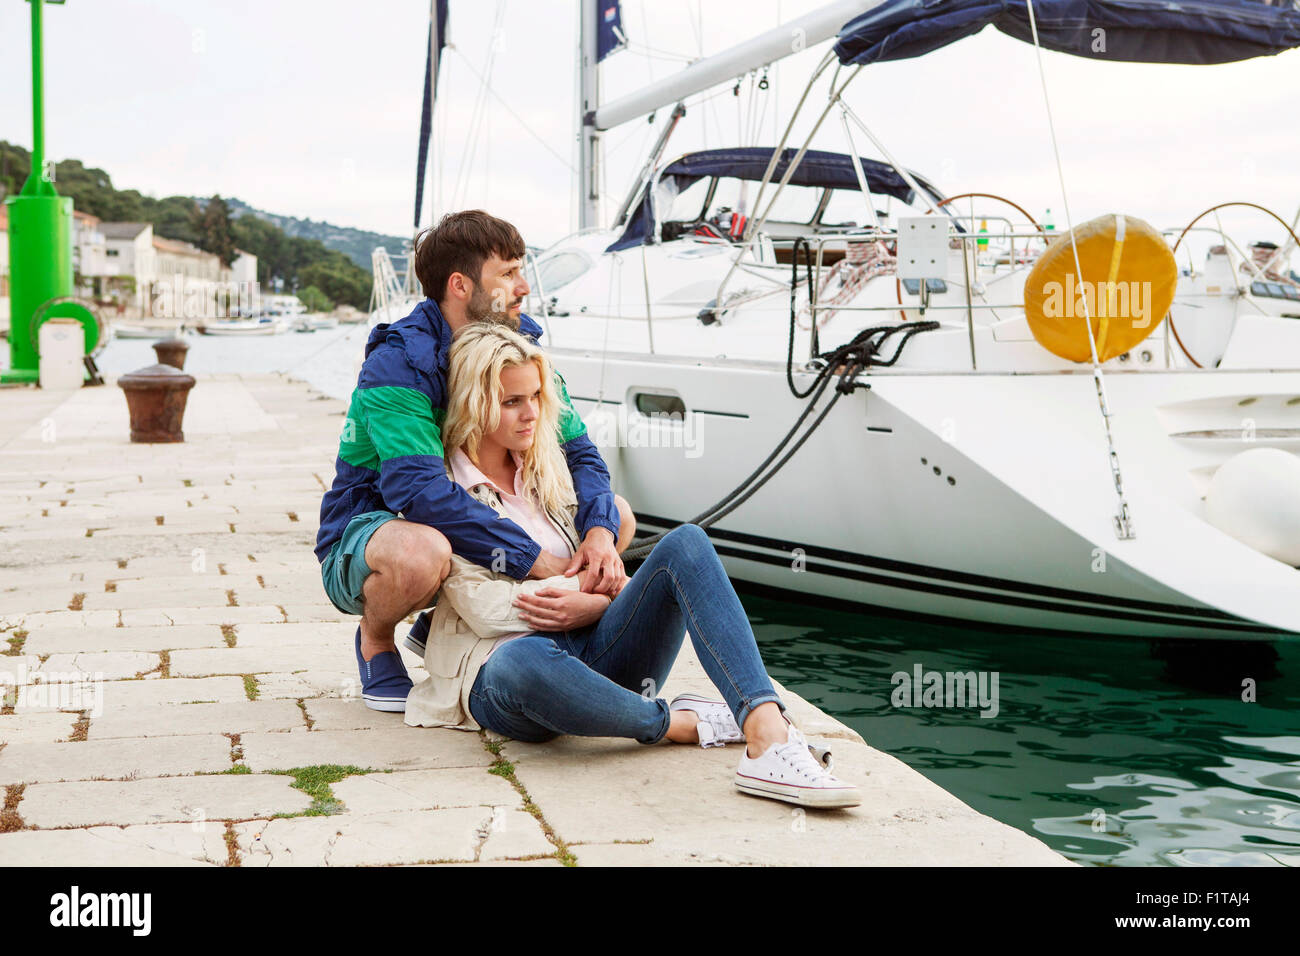 Young couple relaxing on pier, Mer Adriatique Banque D'Images